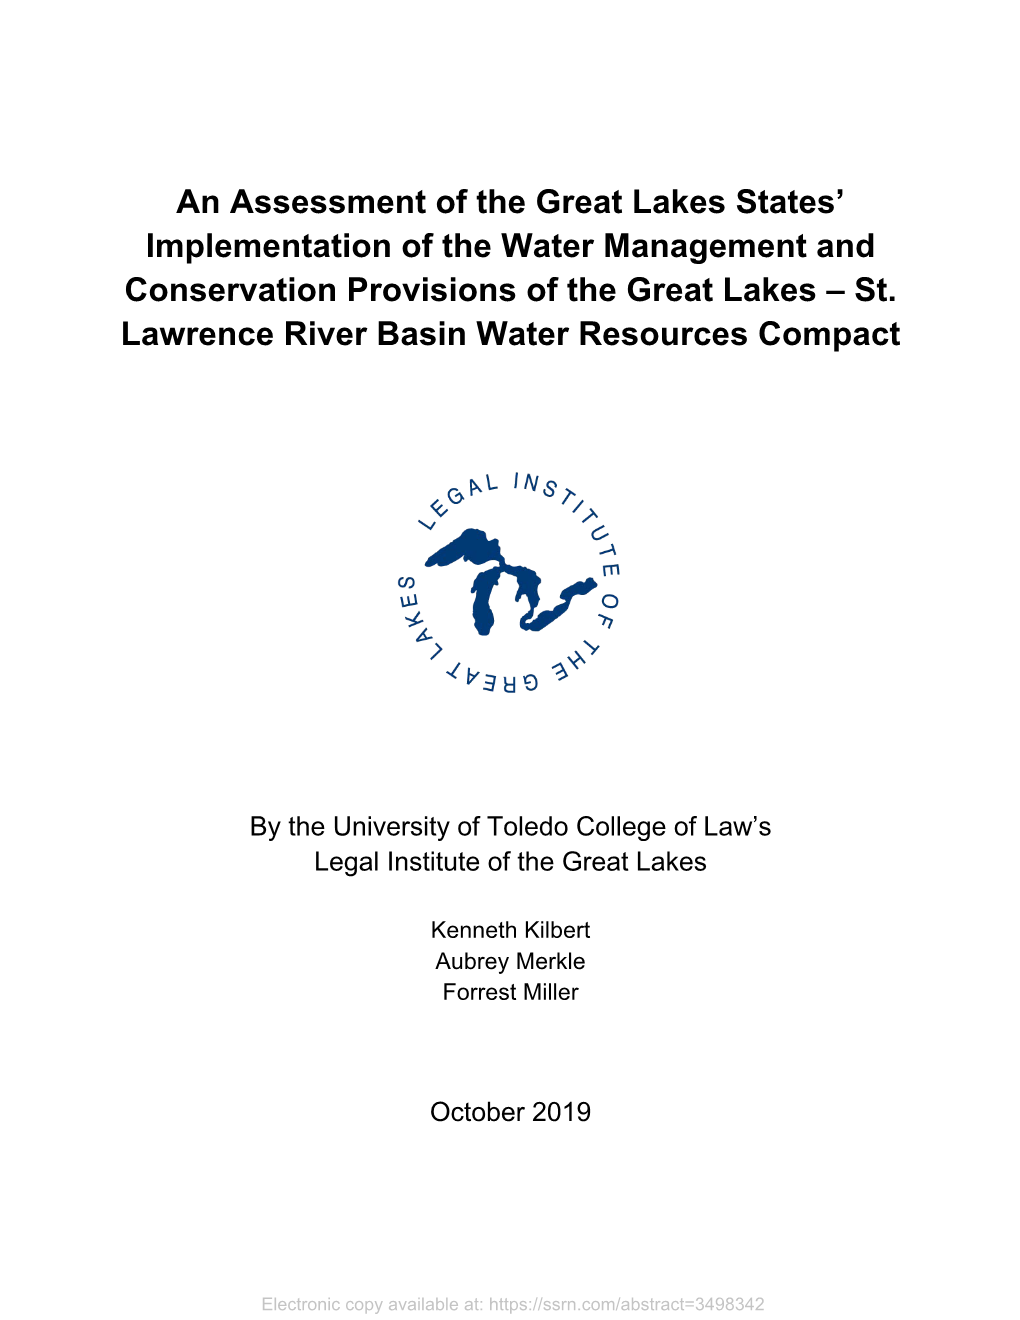 An Assessment of the Great Lakes States' Implementation of the Water